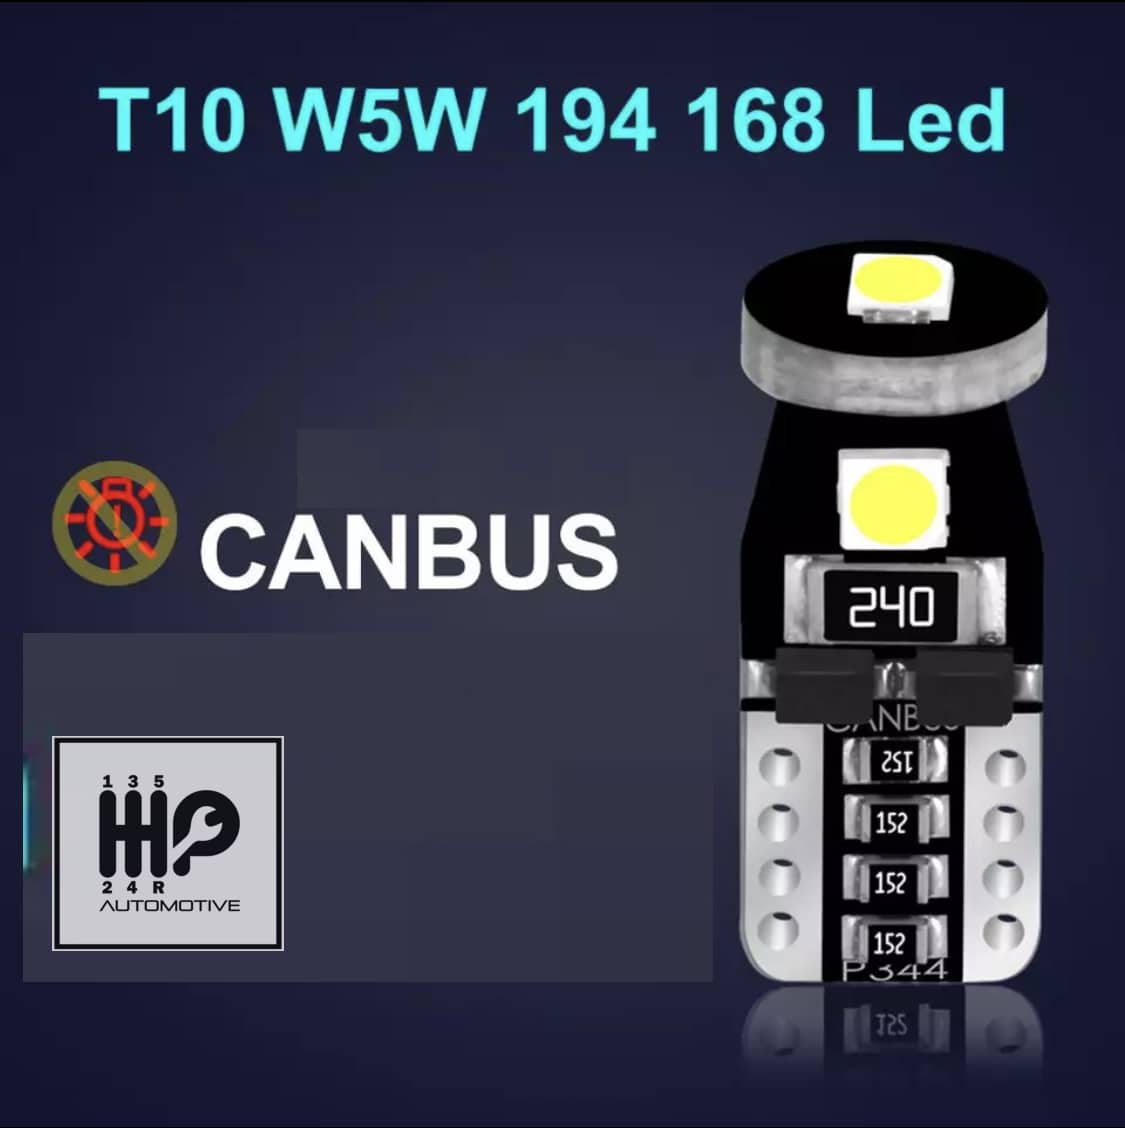 led t10 w5w canbus